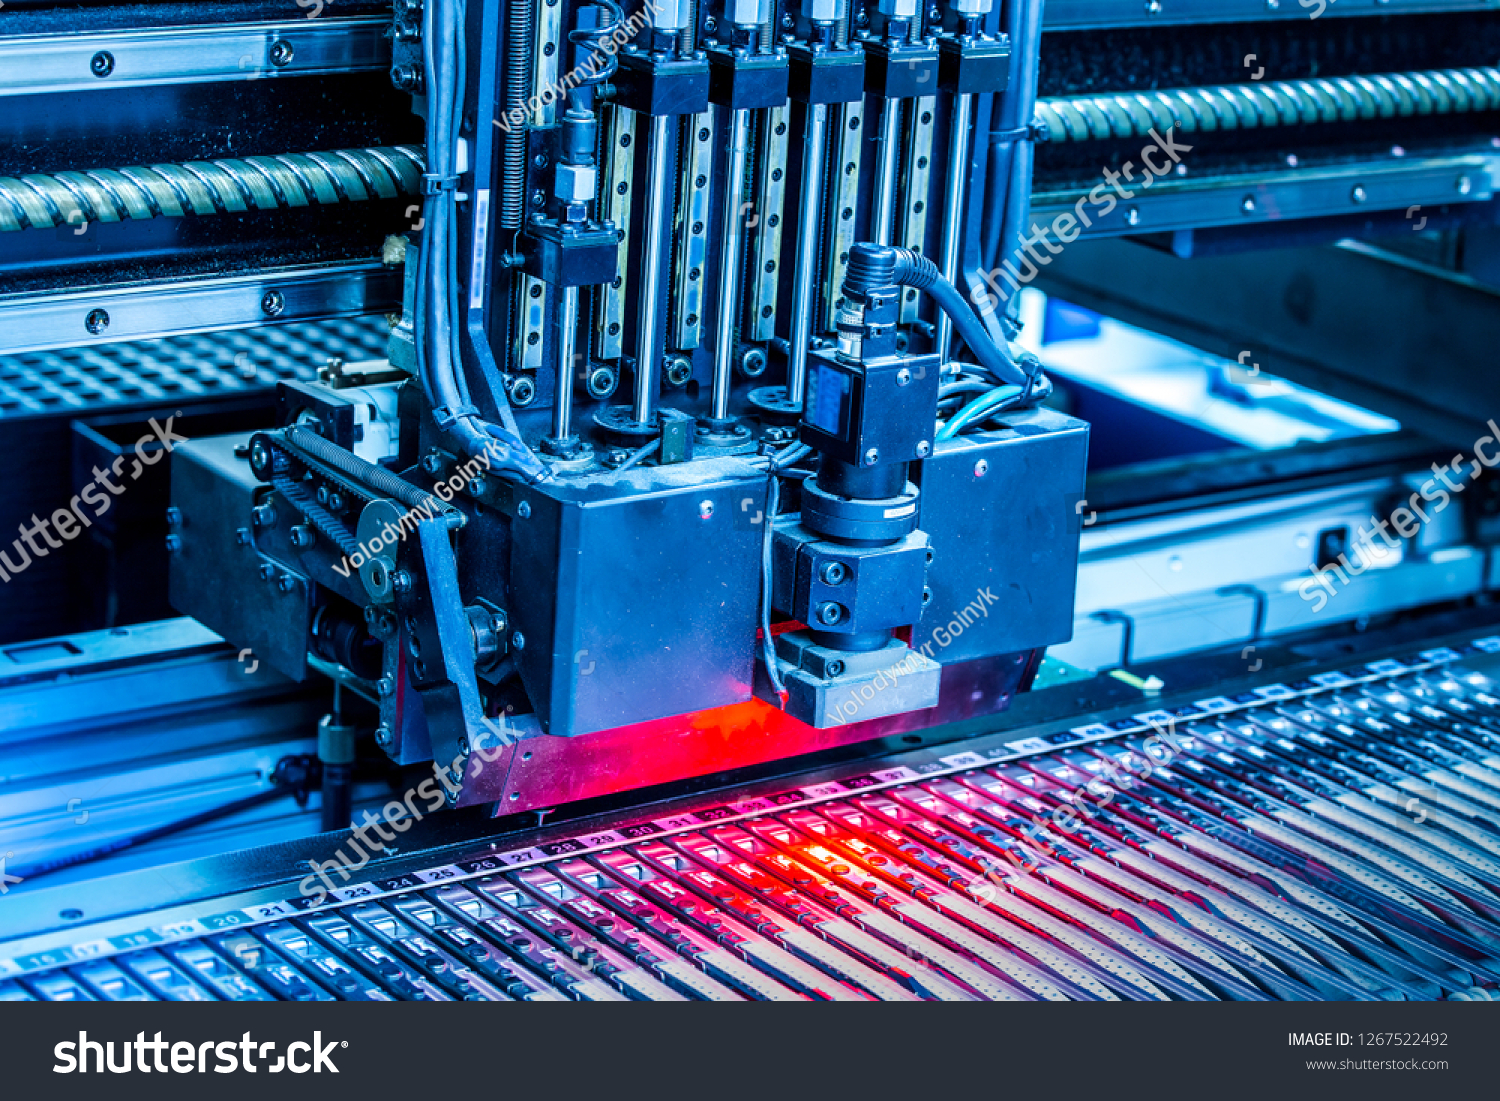 Close-up surface-mounting machine in progress. SMT (surface-mount technology) is a method for producing electronic circuits. Components are placed directly onto the surface of printed circuit boards. #1267522492